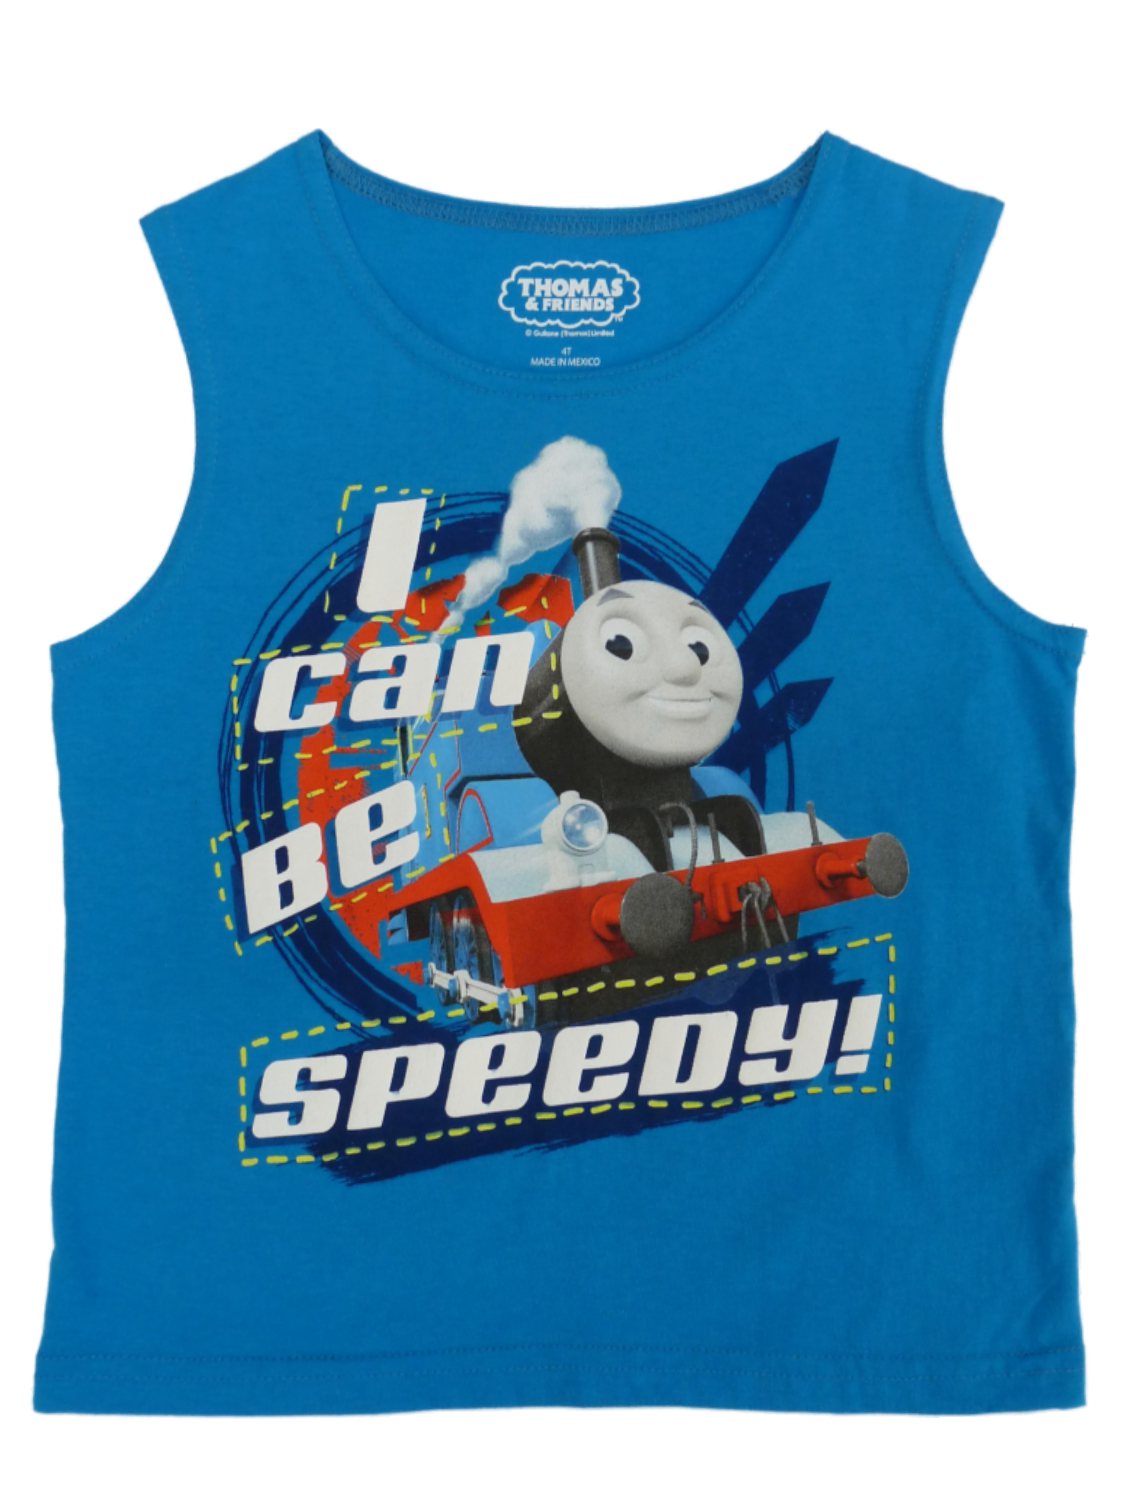 Thomas & Friends Toddler Boys Blue I Can Be Speedy Tank Top Muscle Shirt 3T